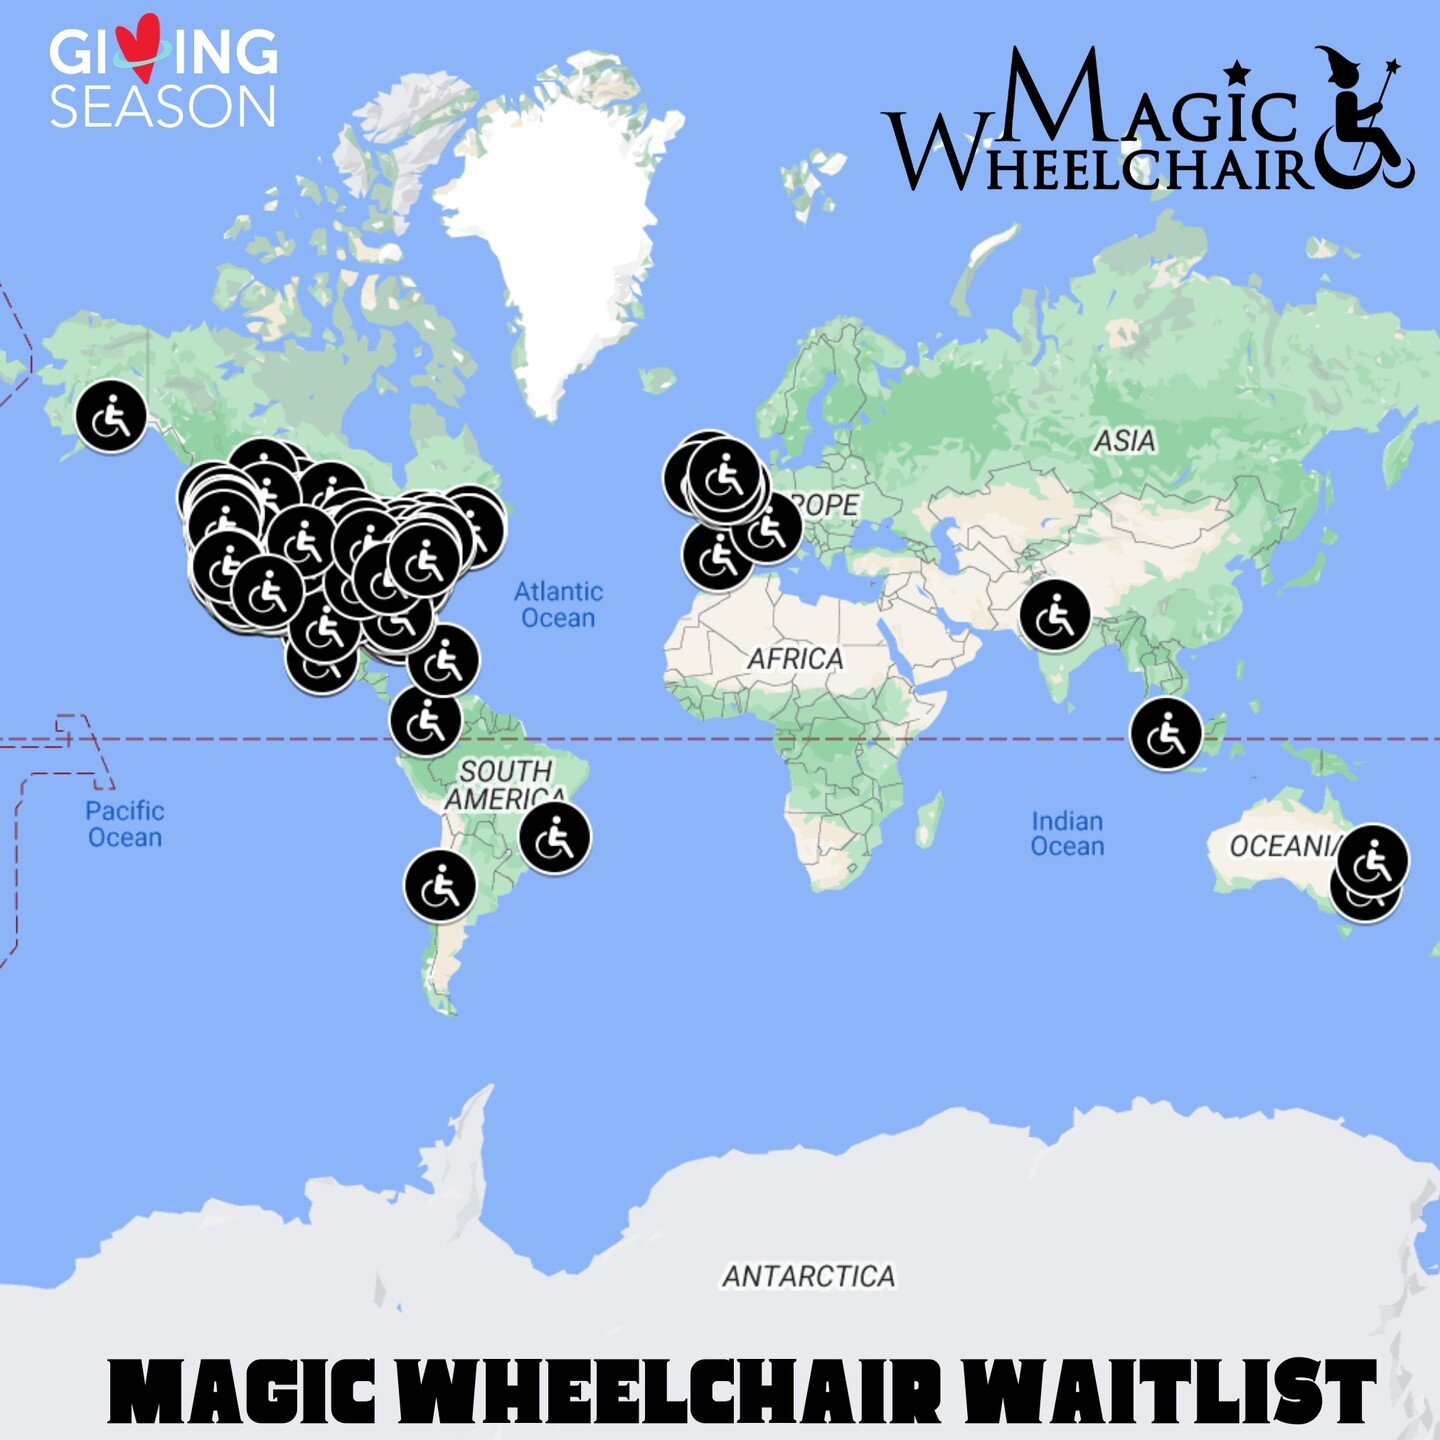 Want to see something really awesome (that also maybe keeps us up at night🤓)? The Magic Wheelchair request map! 

These kiddos, teens, and families have such great wheelchair costume ideas and we can't wait to build every single one! 

Your donation